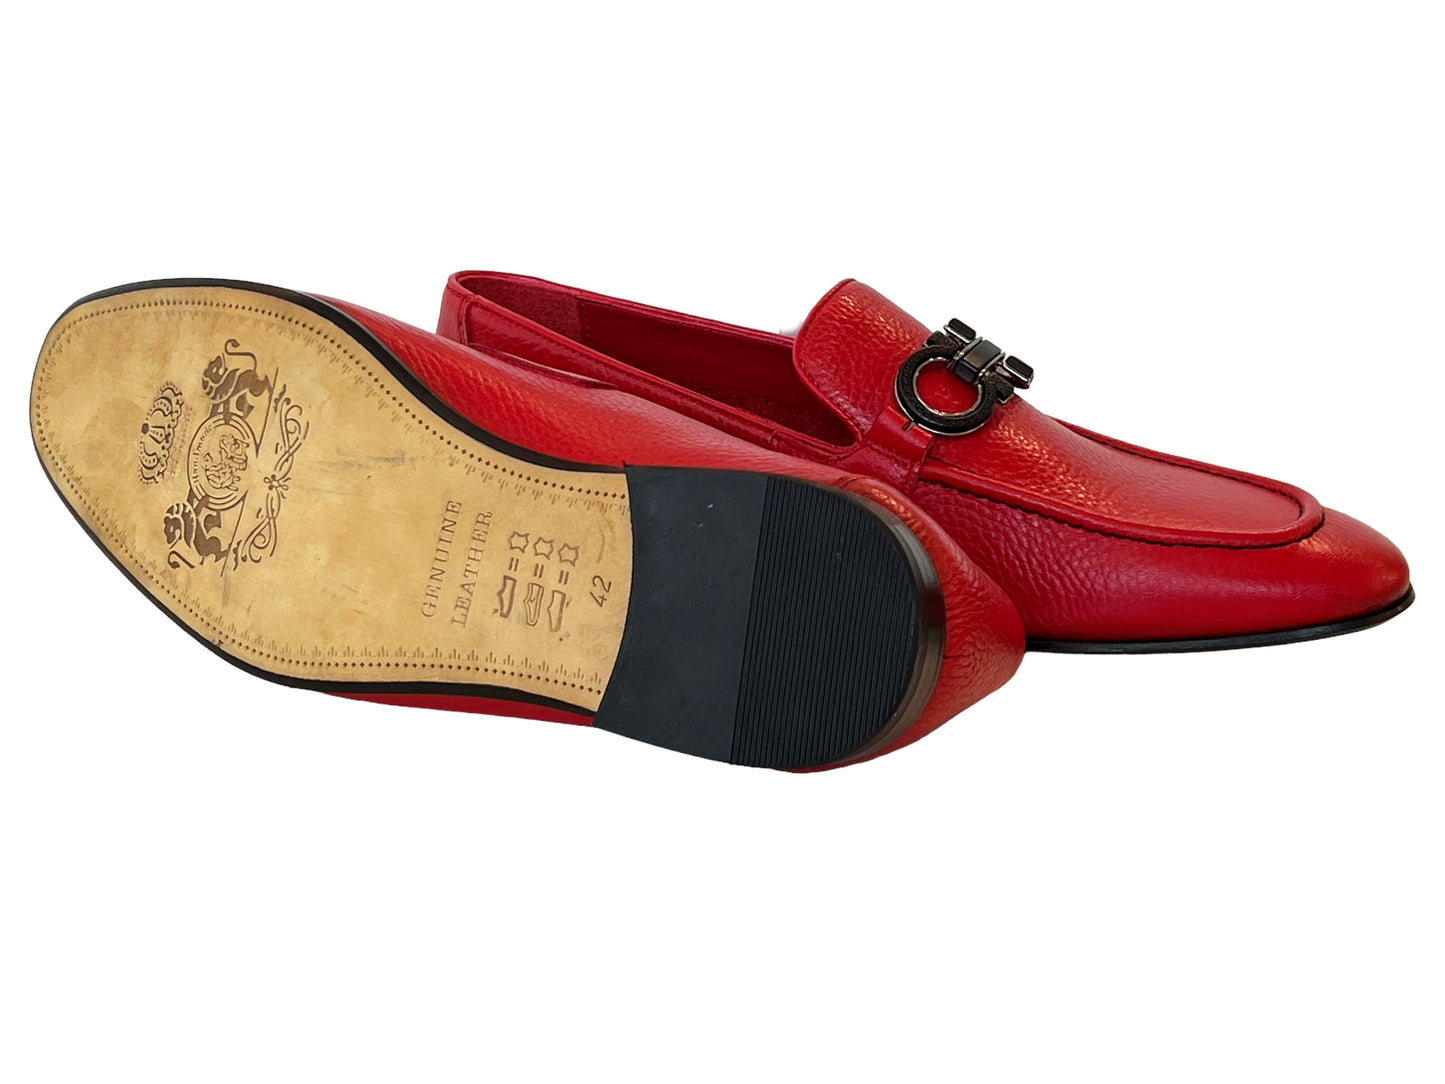 P000653-6472 Red Bit Buckle loafer